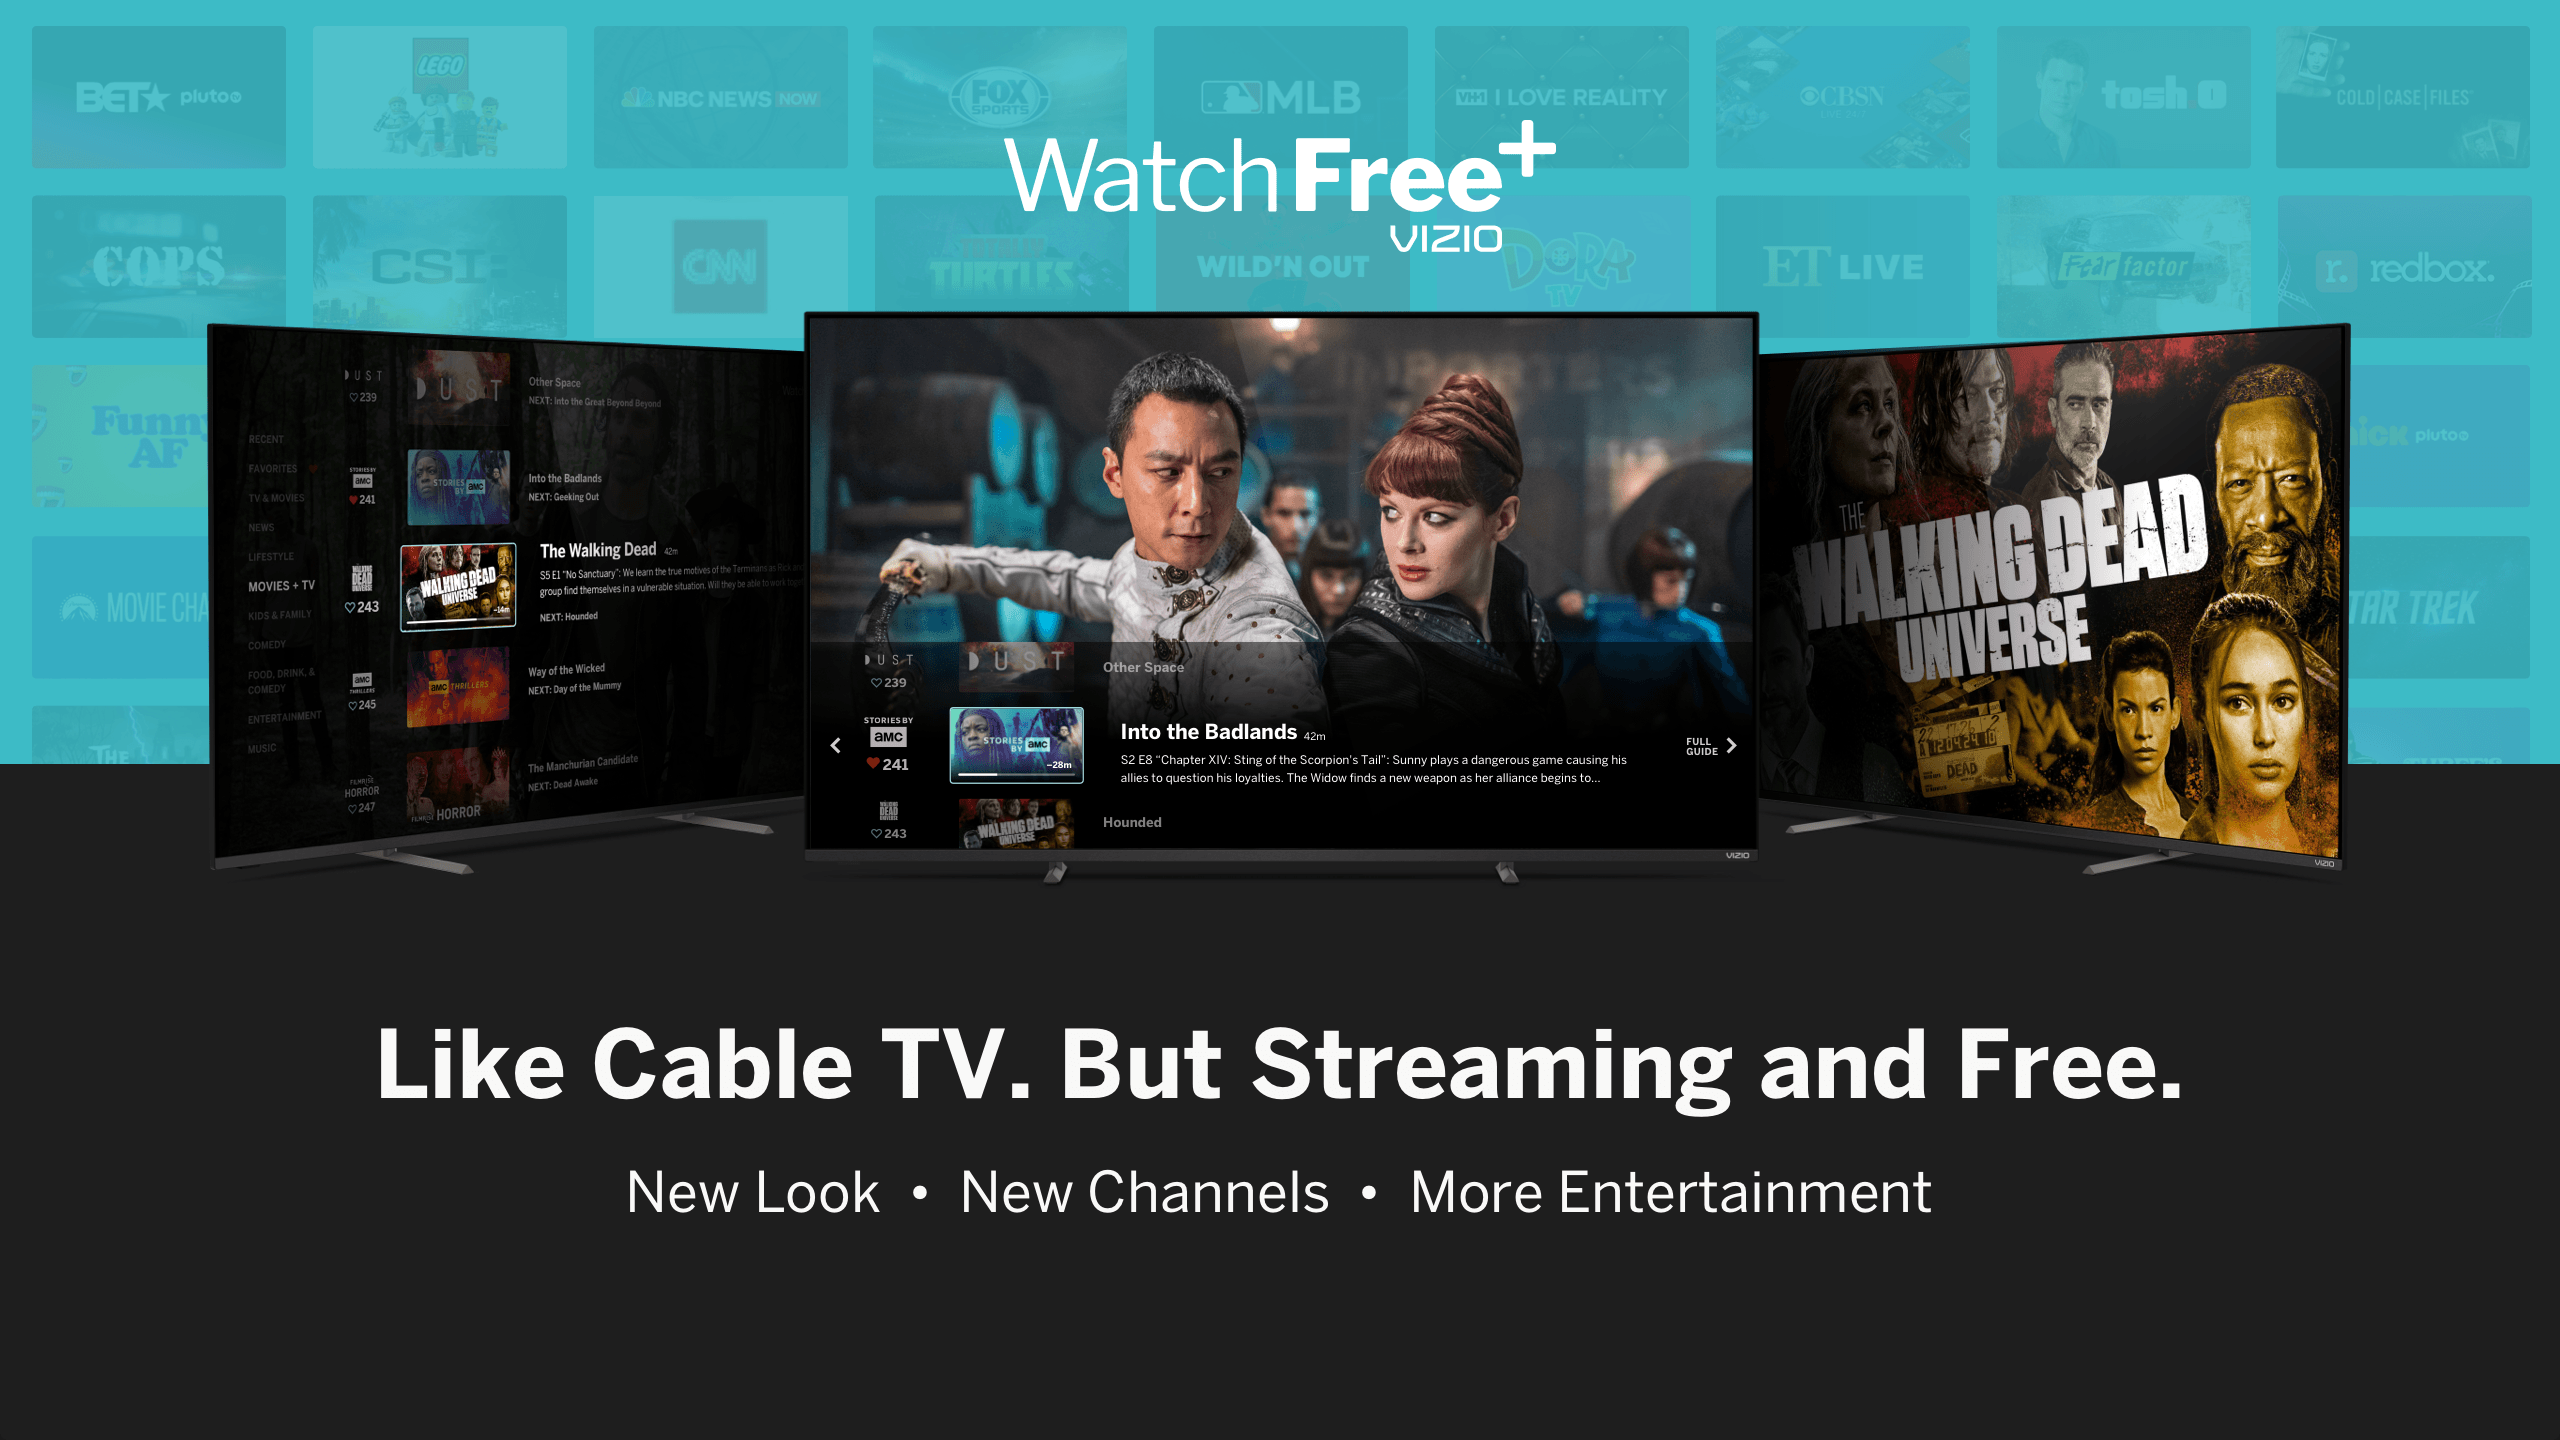 VIZIO Unveils New Look and Channels on its WatchFree Video Service